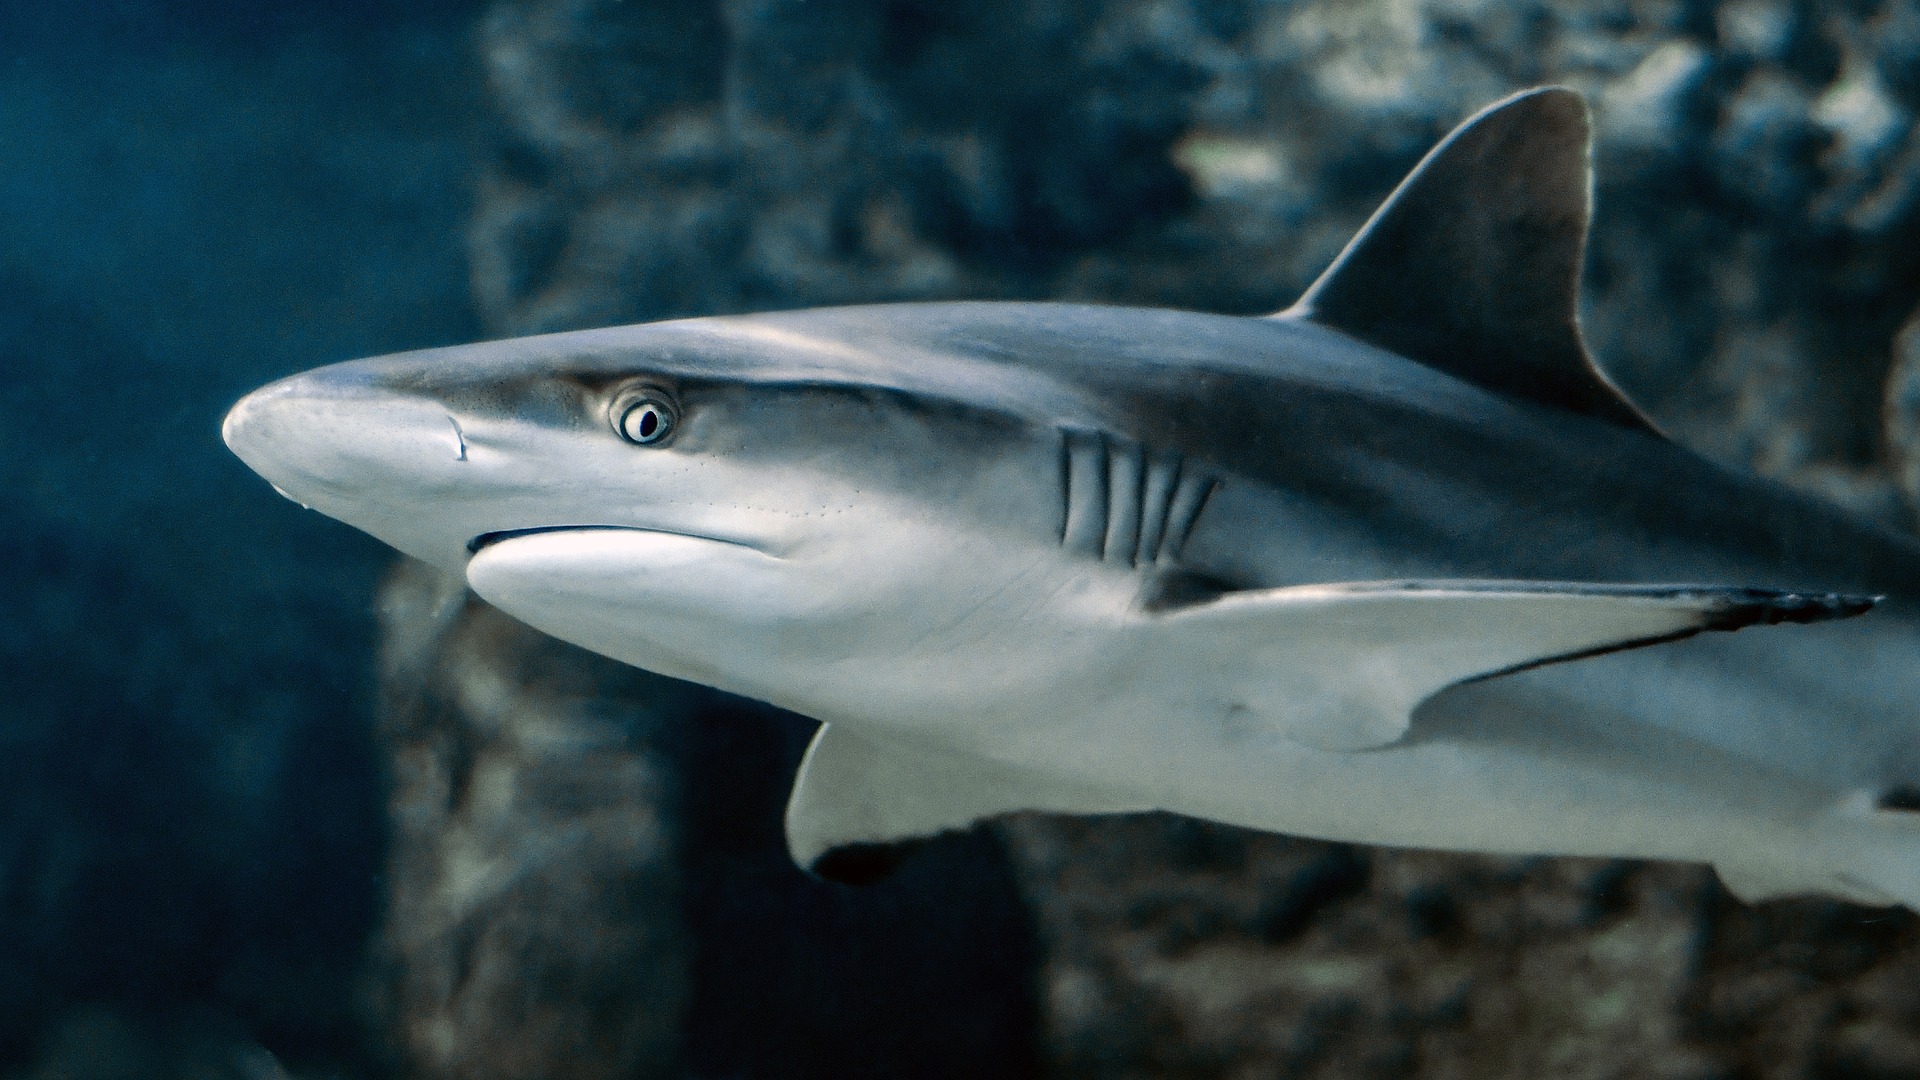 What We Can Learn From Shark Week